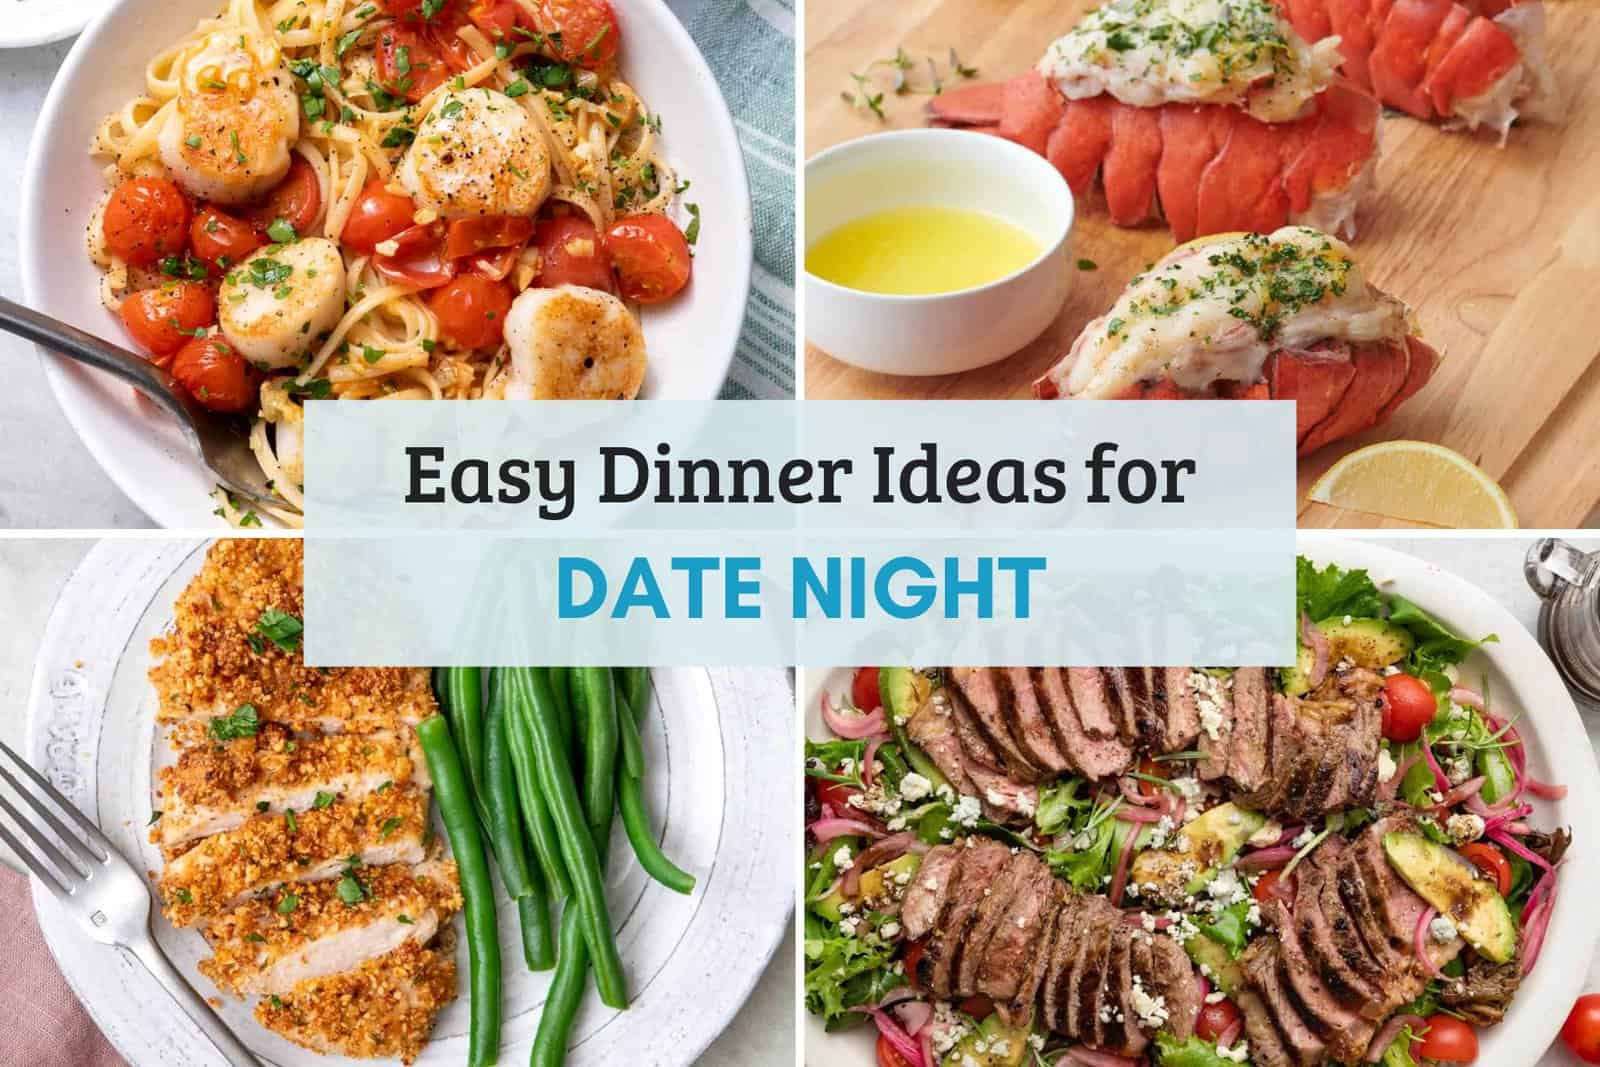 Easy Dinner Ideas for Date Night collage.